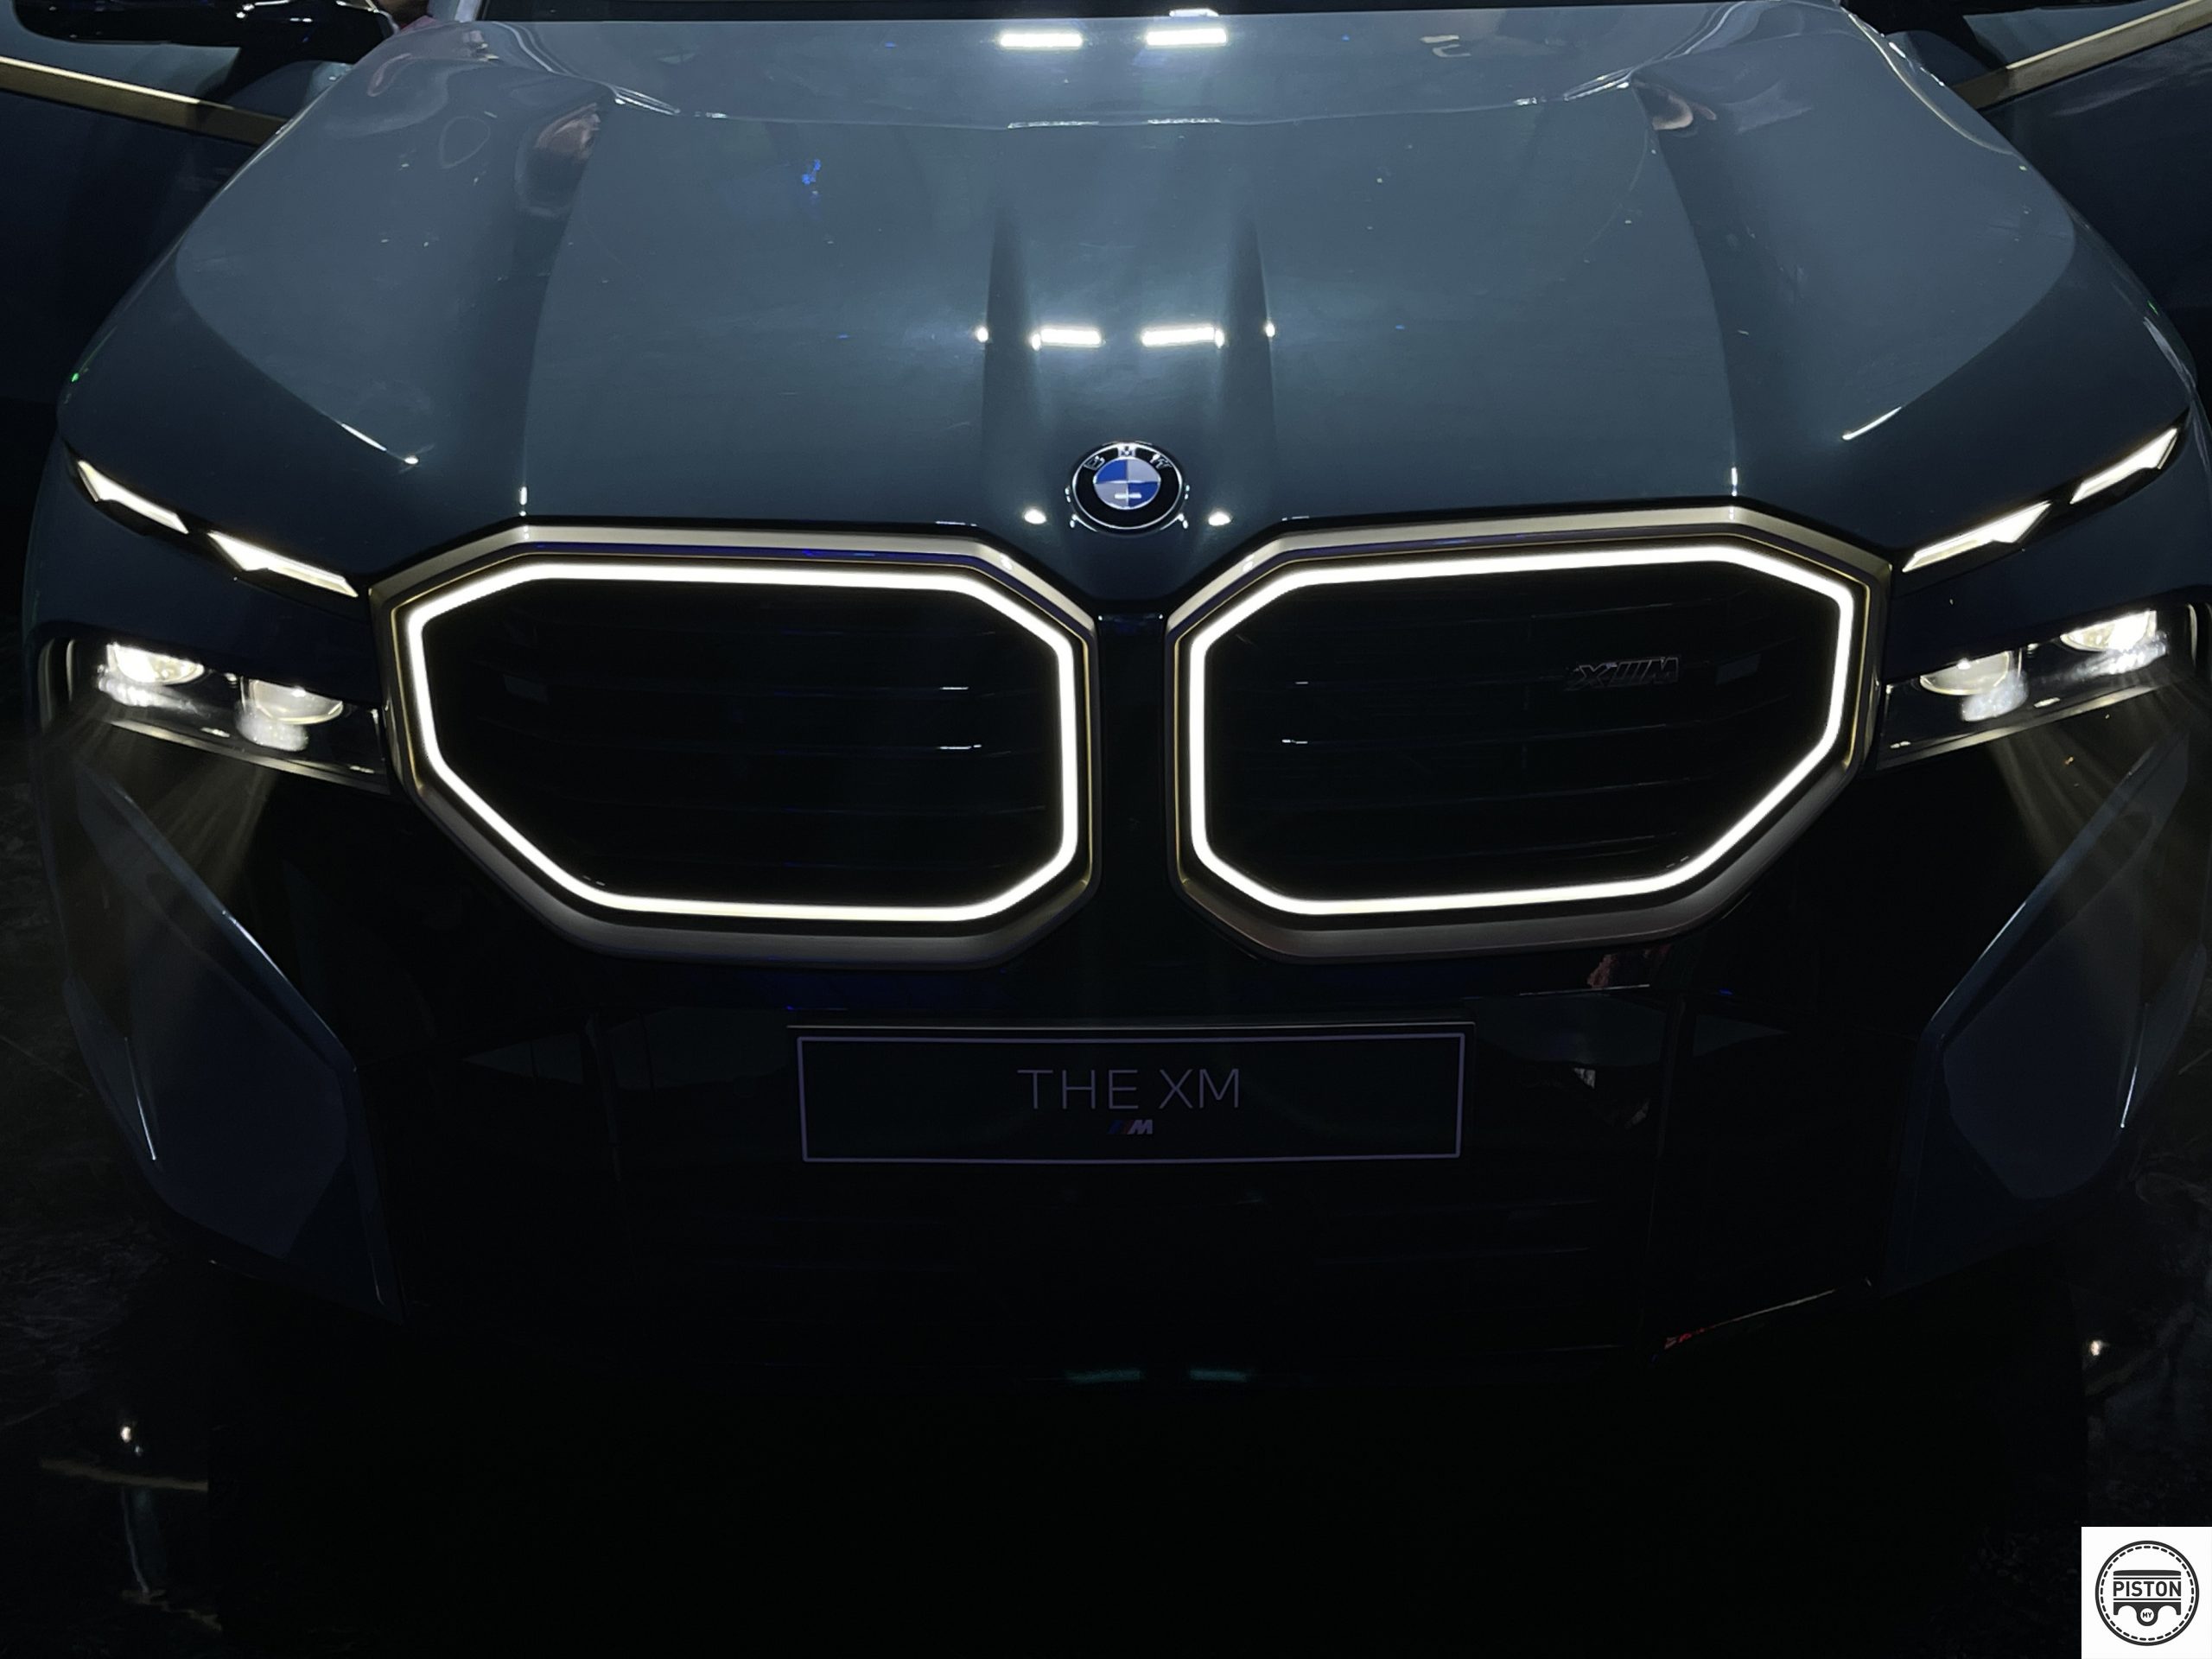 bmw xm launched in malaysia: priced from rm1.3 million